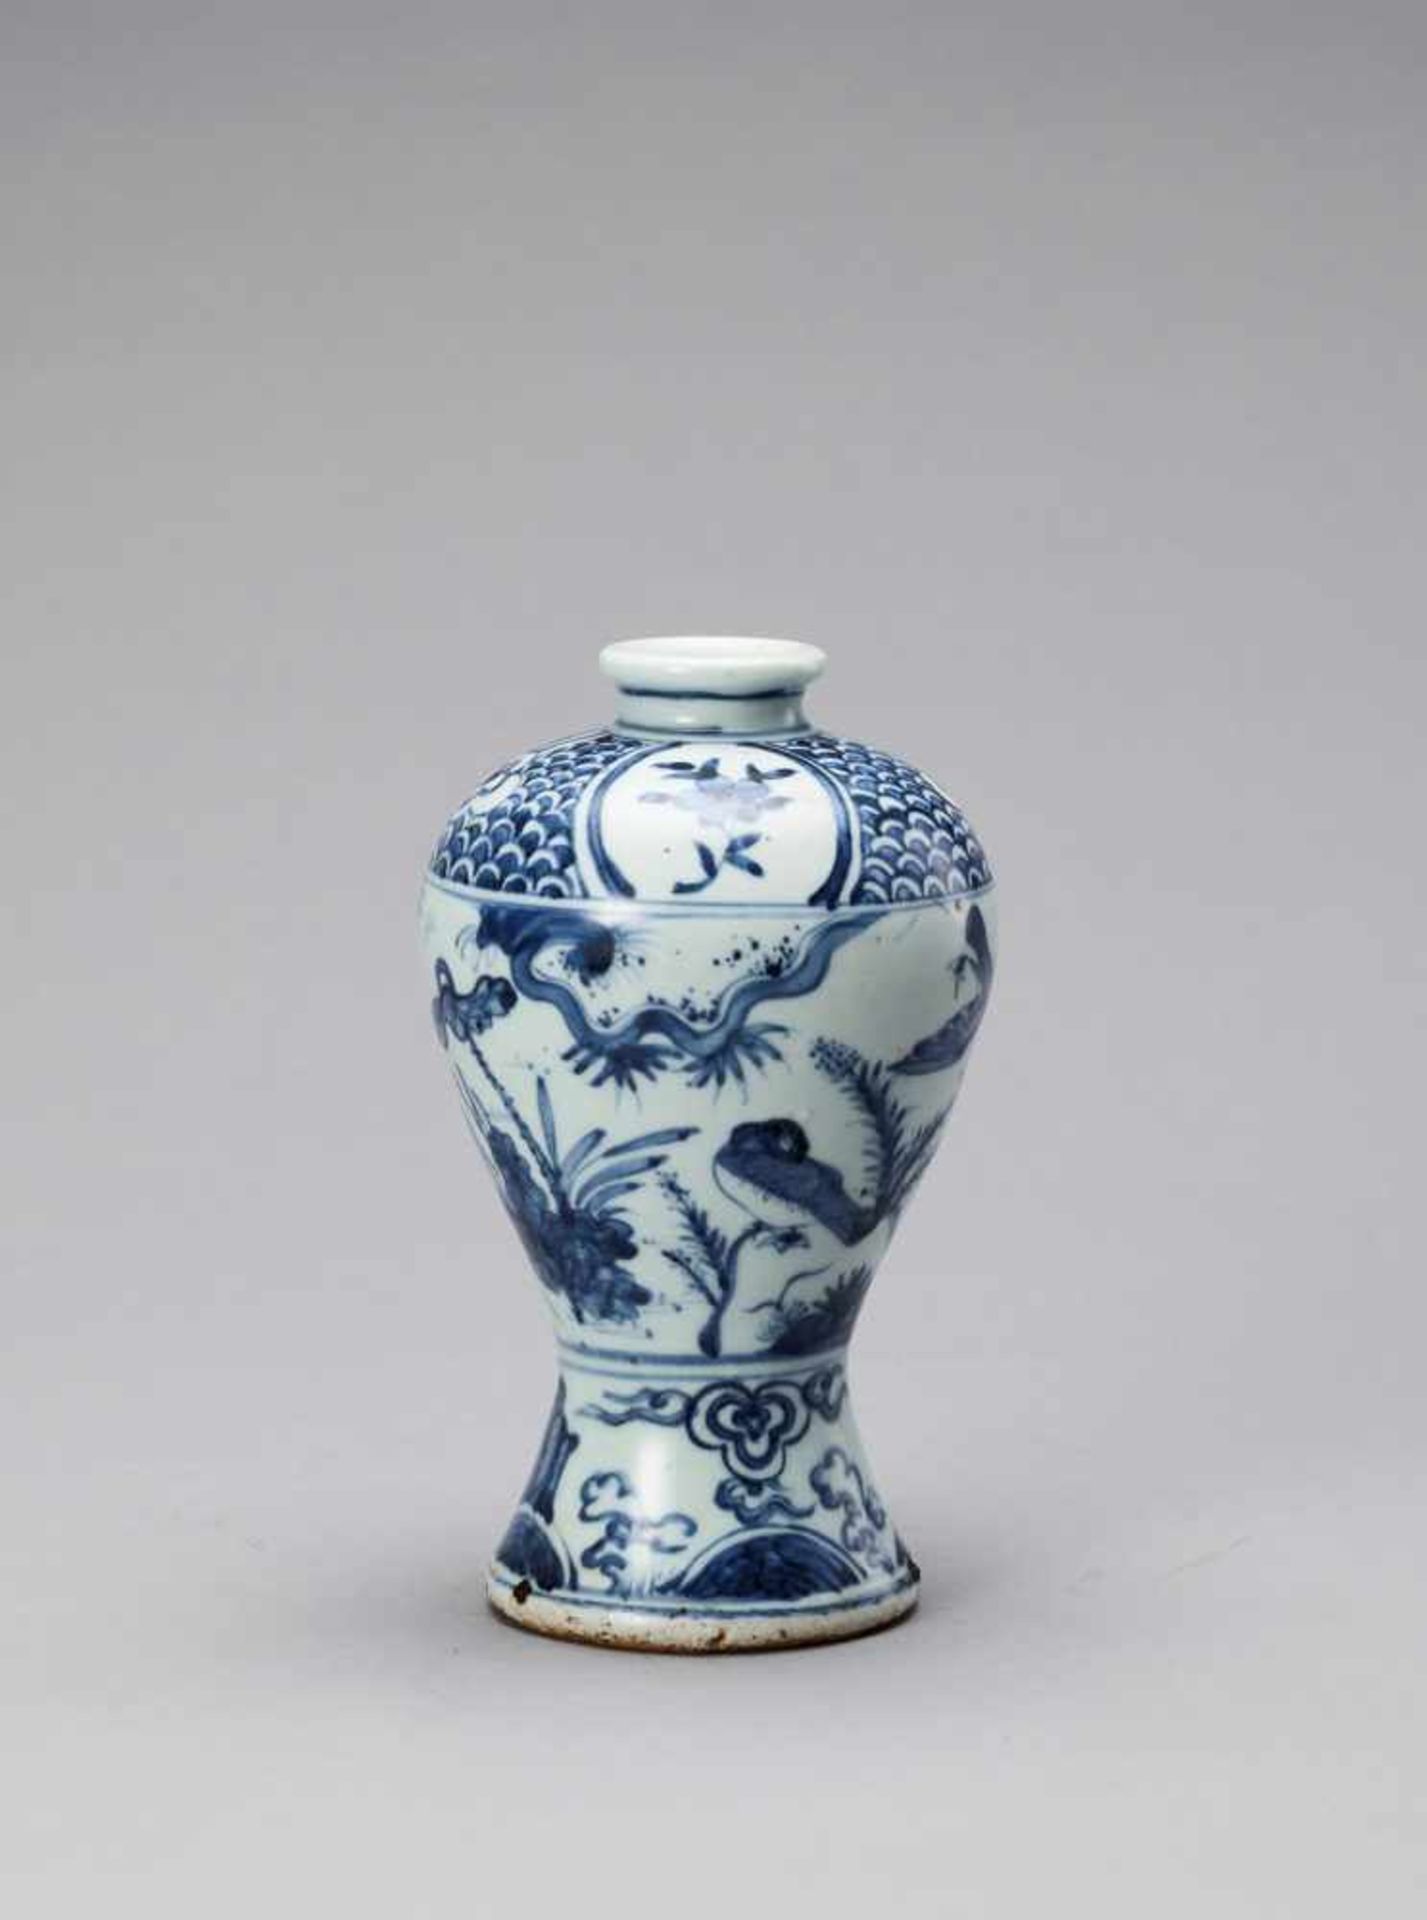 A BLUE AND WHITE GLAZED PORCELAIN MEIPING VASE, LATE MING - Image 4 of 6